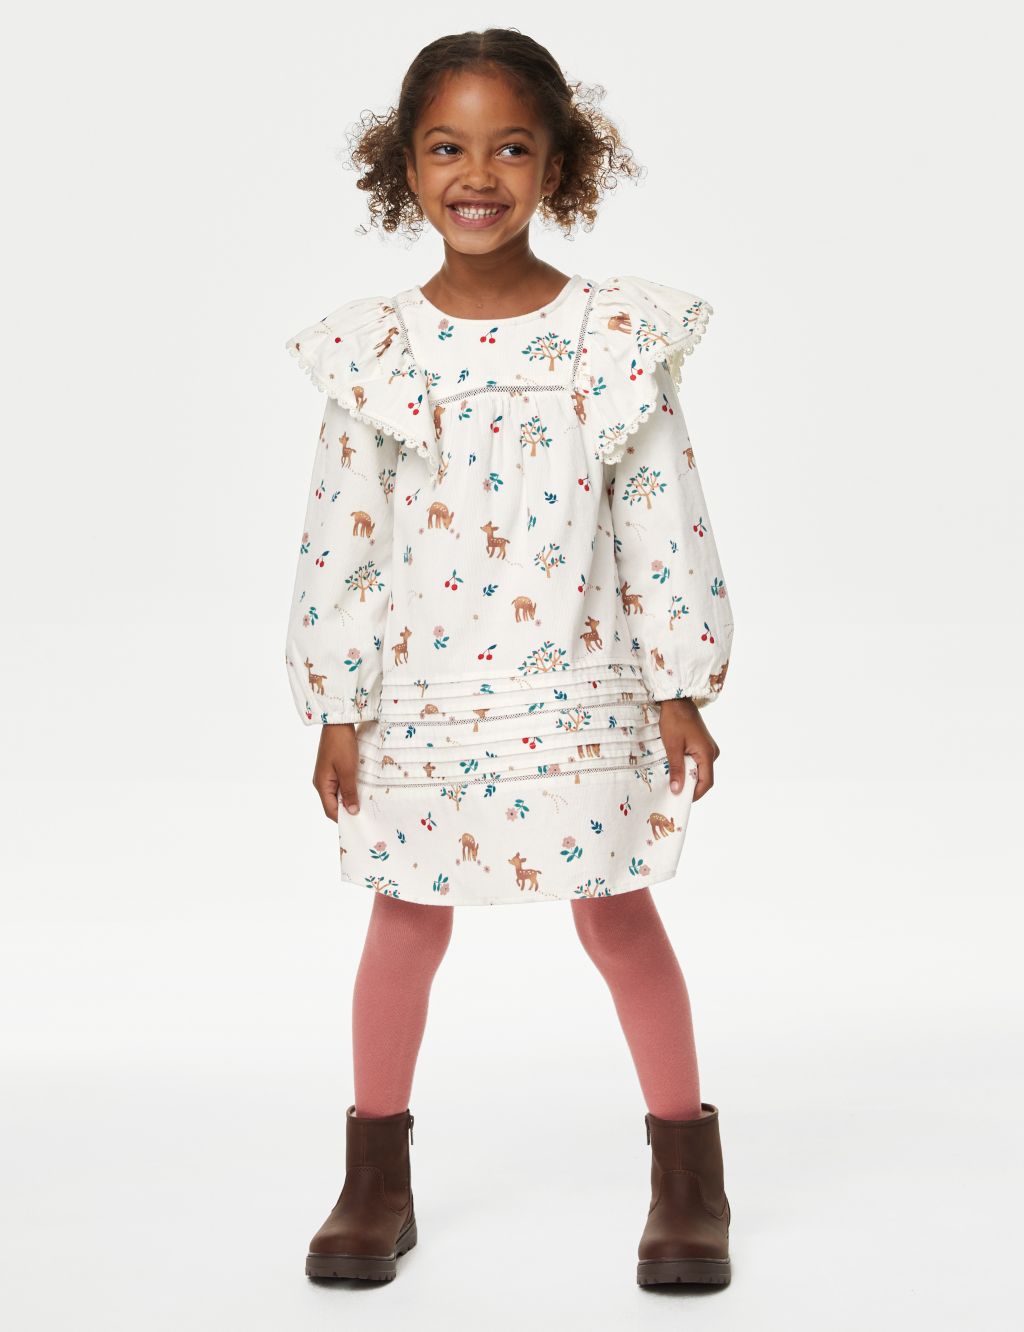 Cotton Rich Deer Print Dress with Tights (2-8 Yrs) image 1